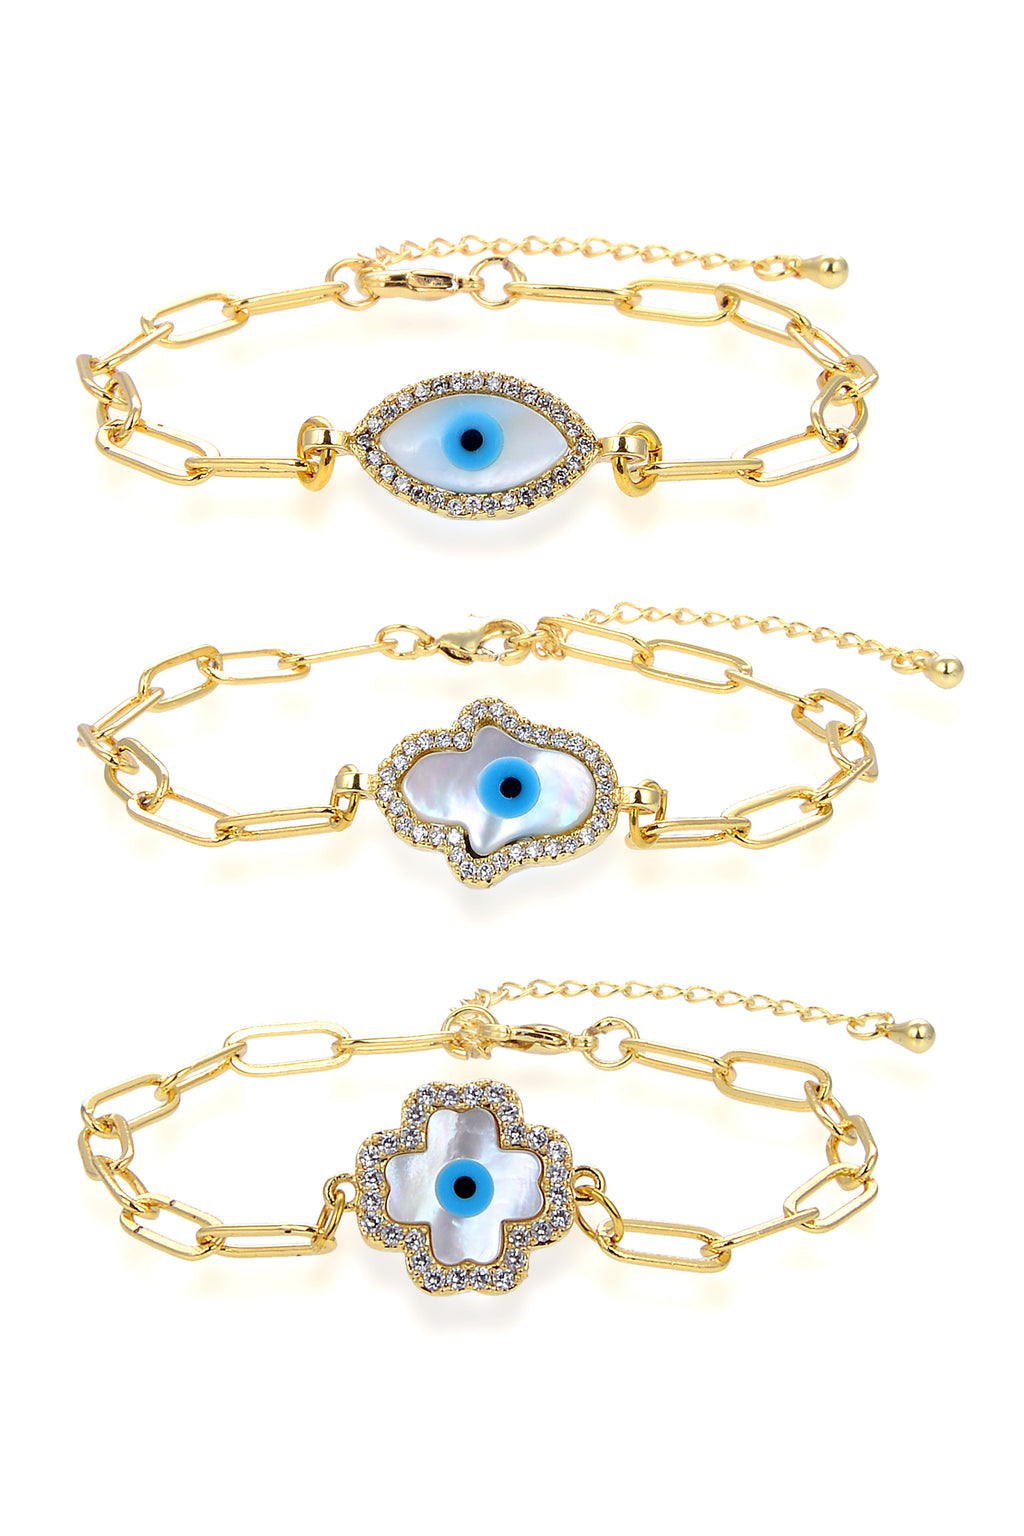 Set of 3 gold chain link bracelets. Each features evil eye motif. One housed in eye setting, one housed in hamsa hand setting and one in four leaf clover setting.